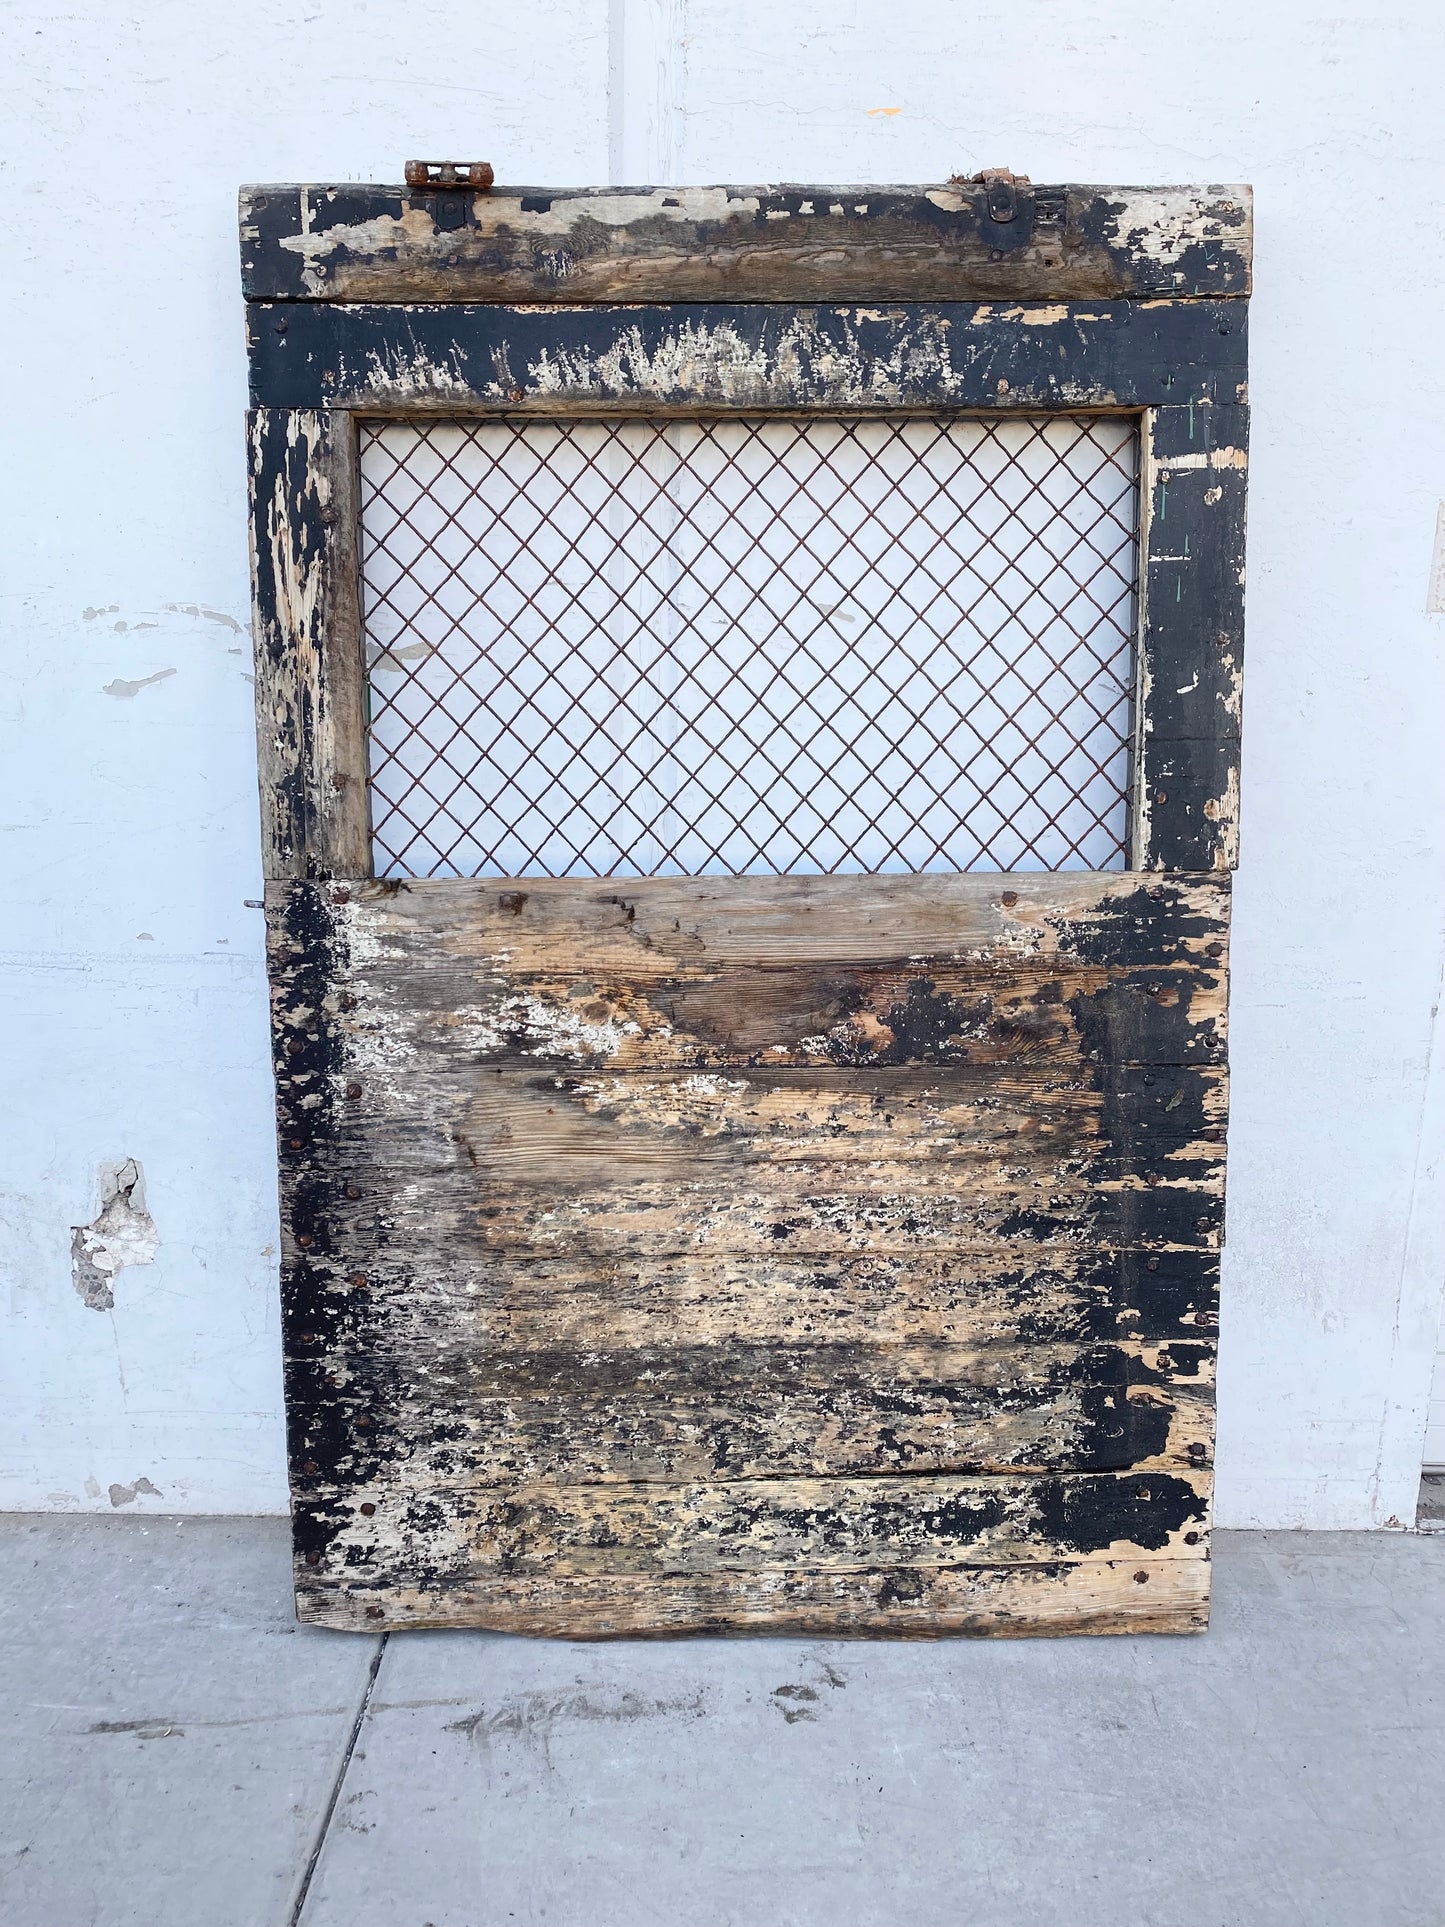 Single Bleached Antique Barn Stall Door with Mesh